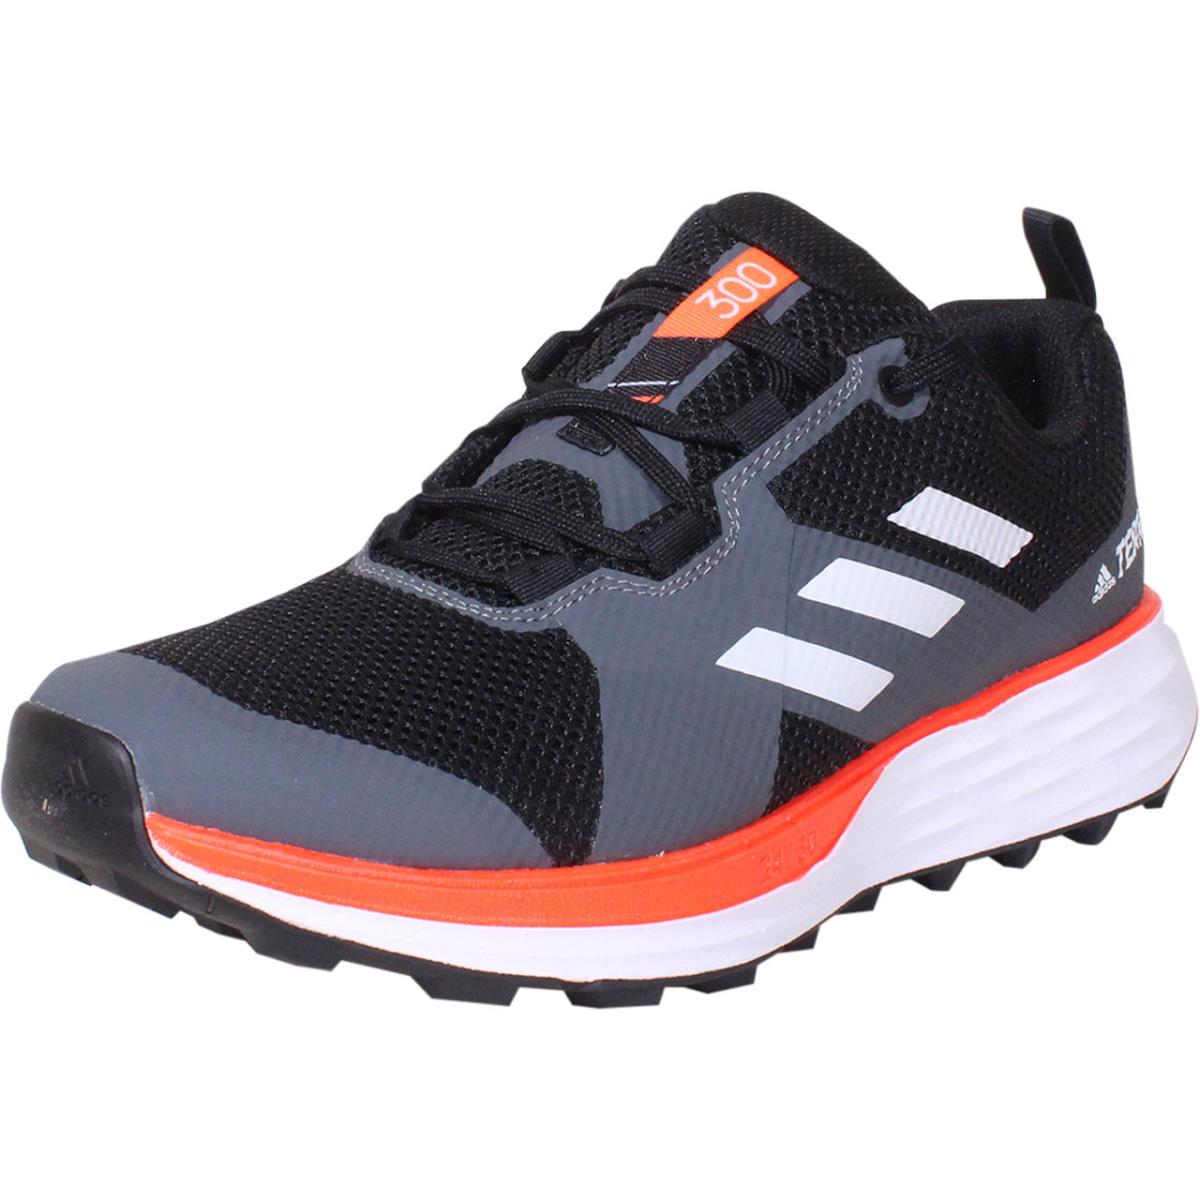 Adidas Terrex-two Sneakers Men`s Trail Running Shoes Black